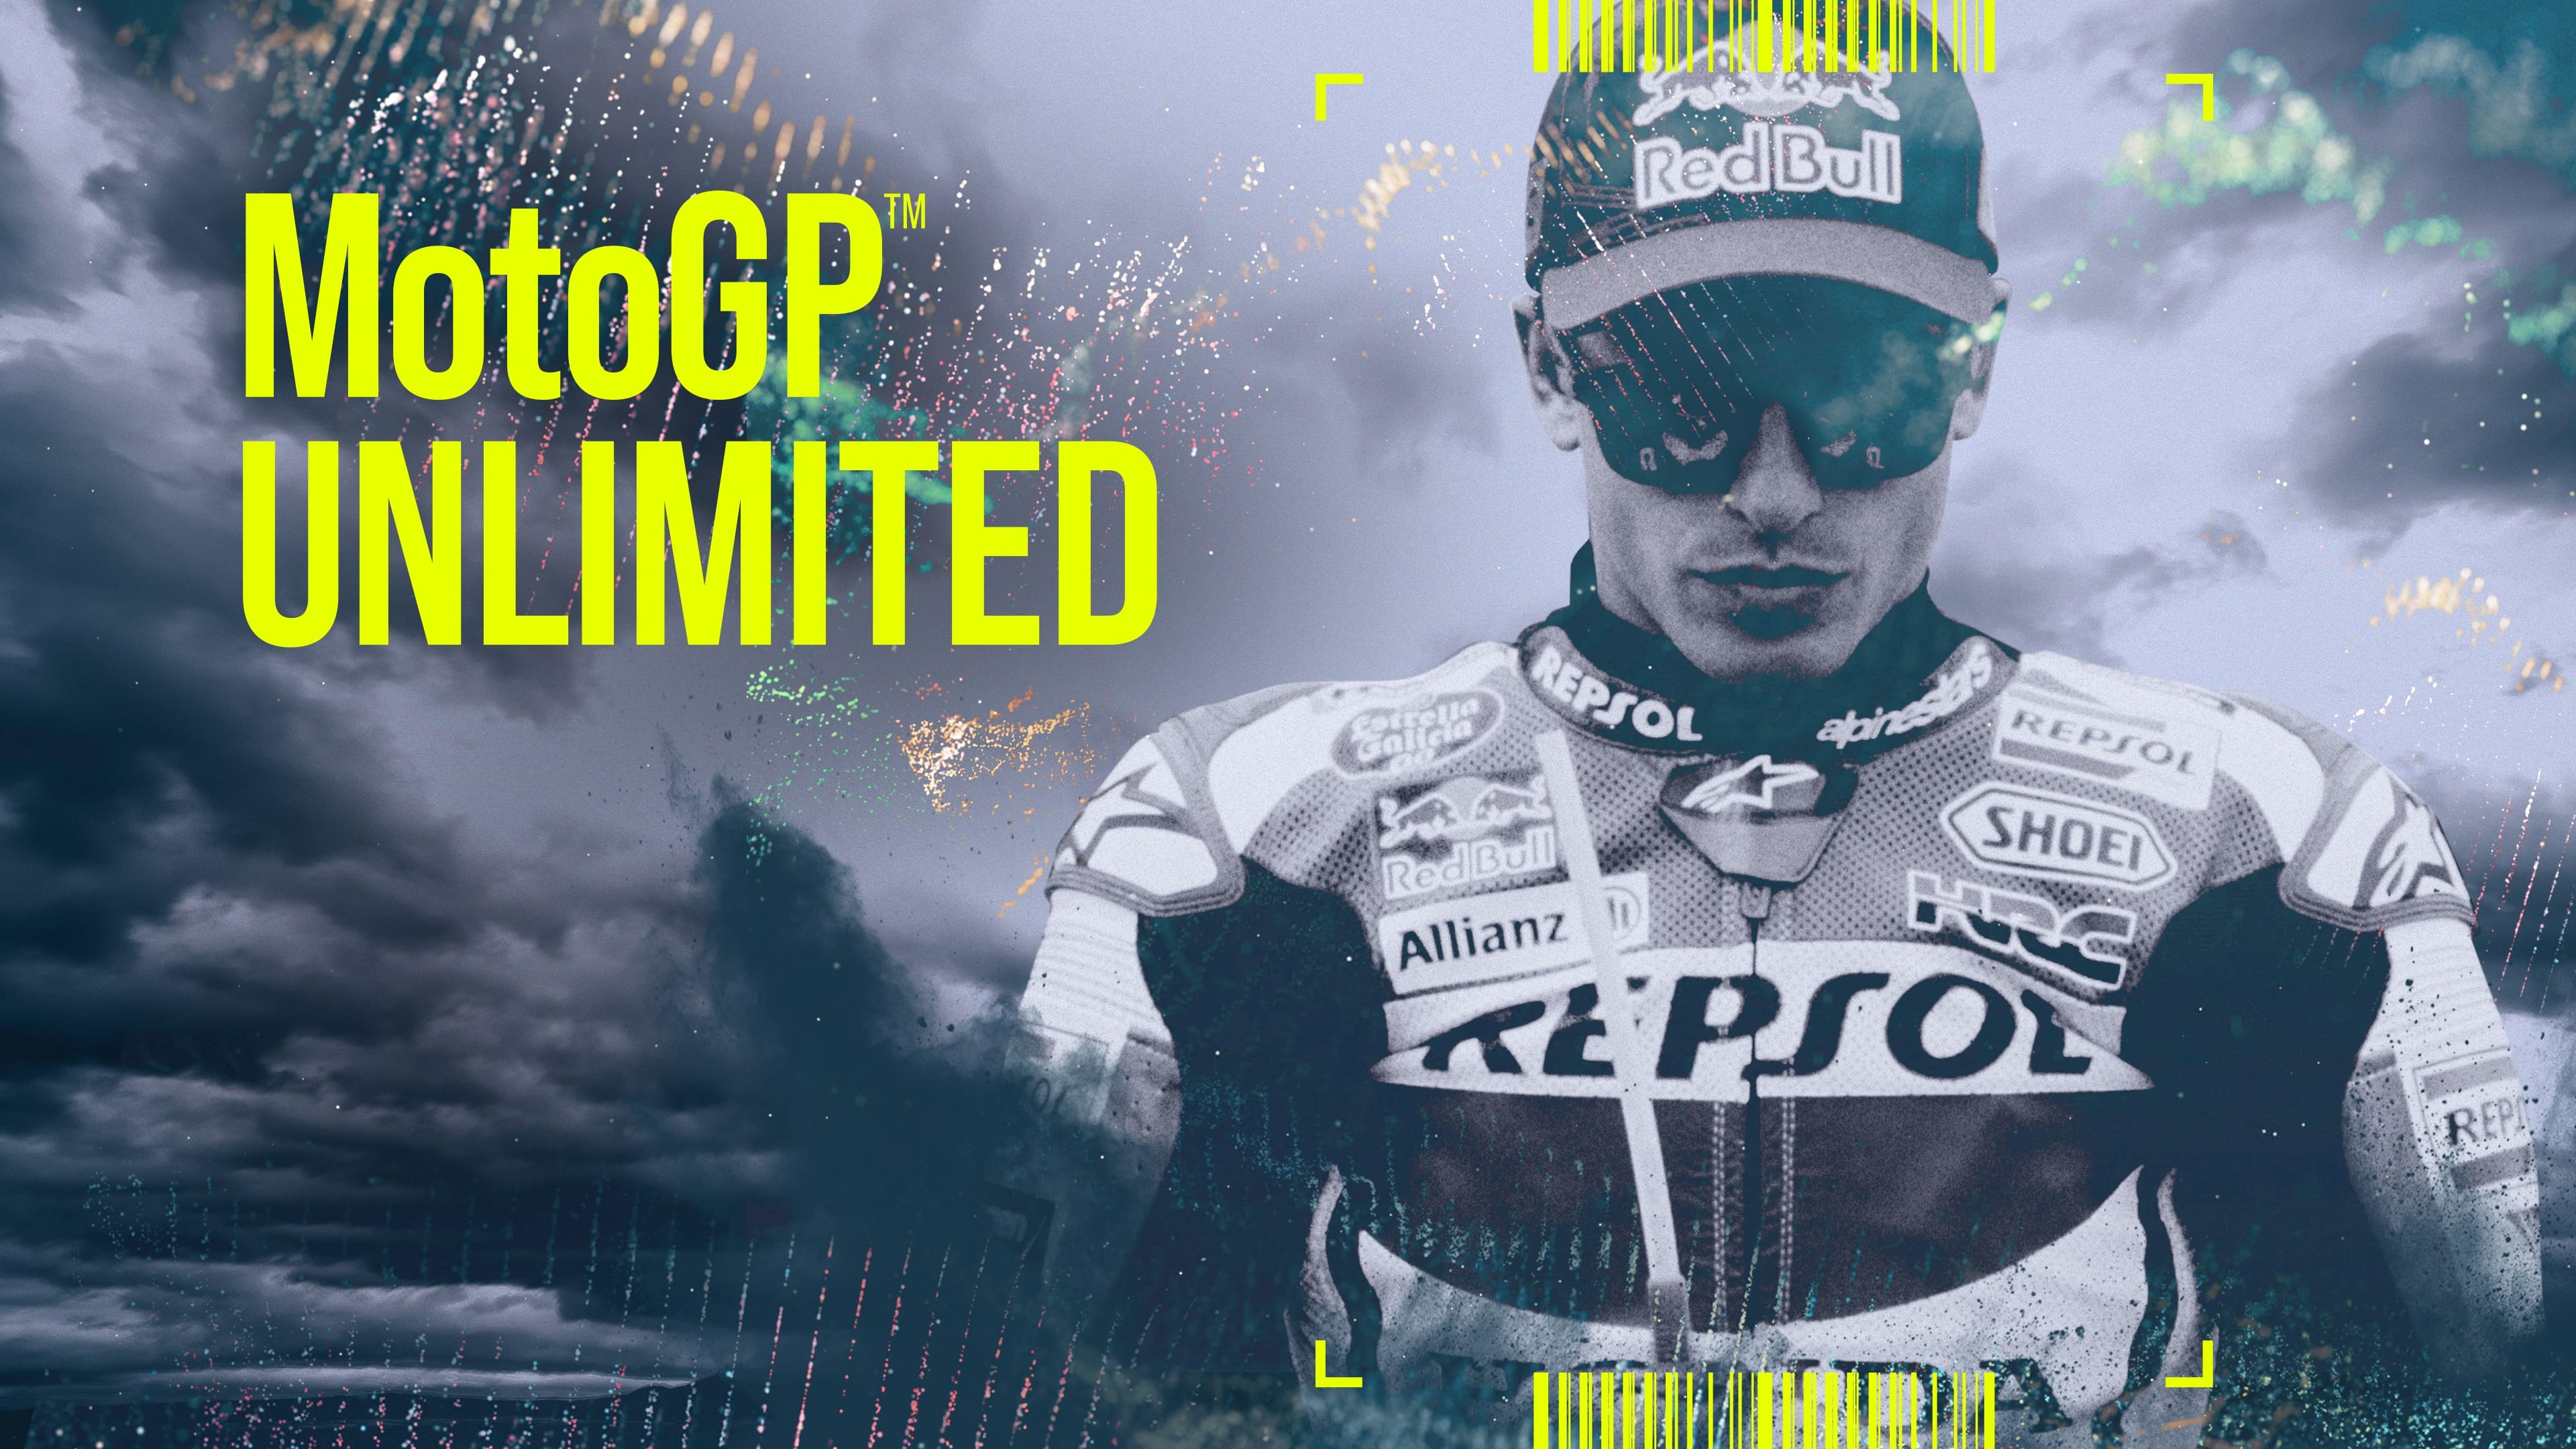 motogp unlimited streaming free